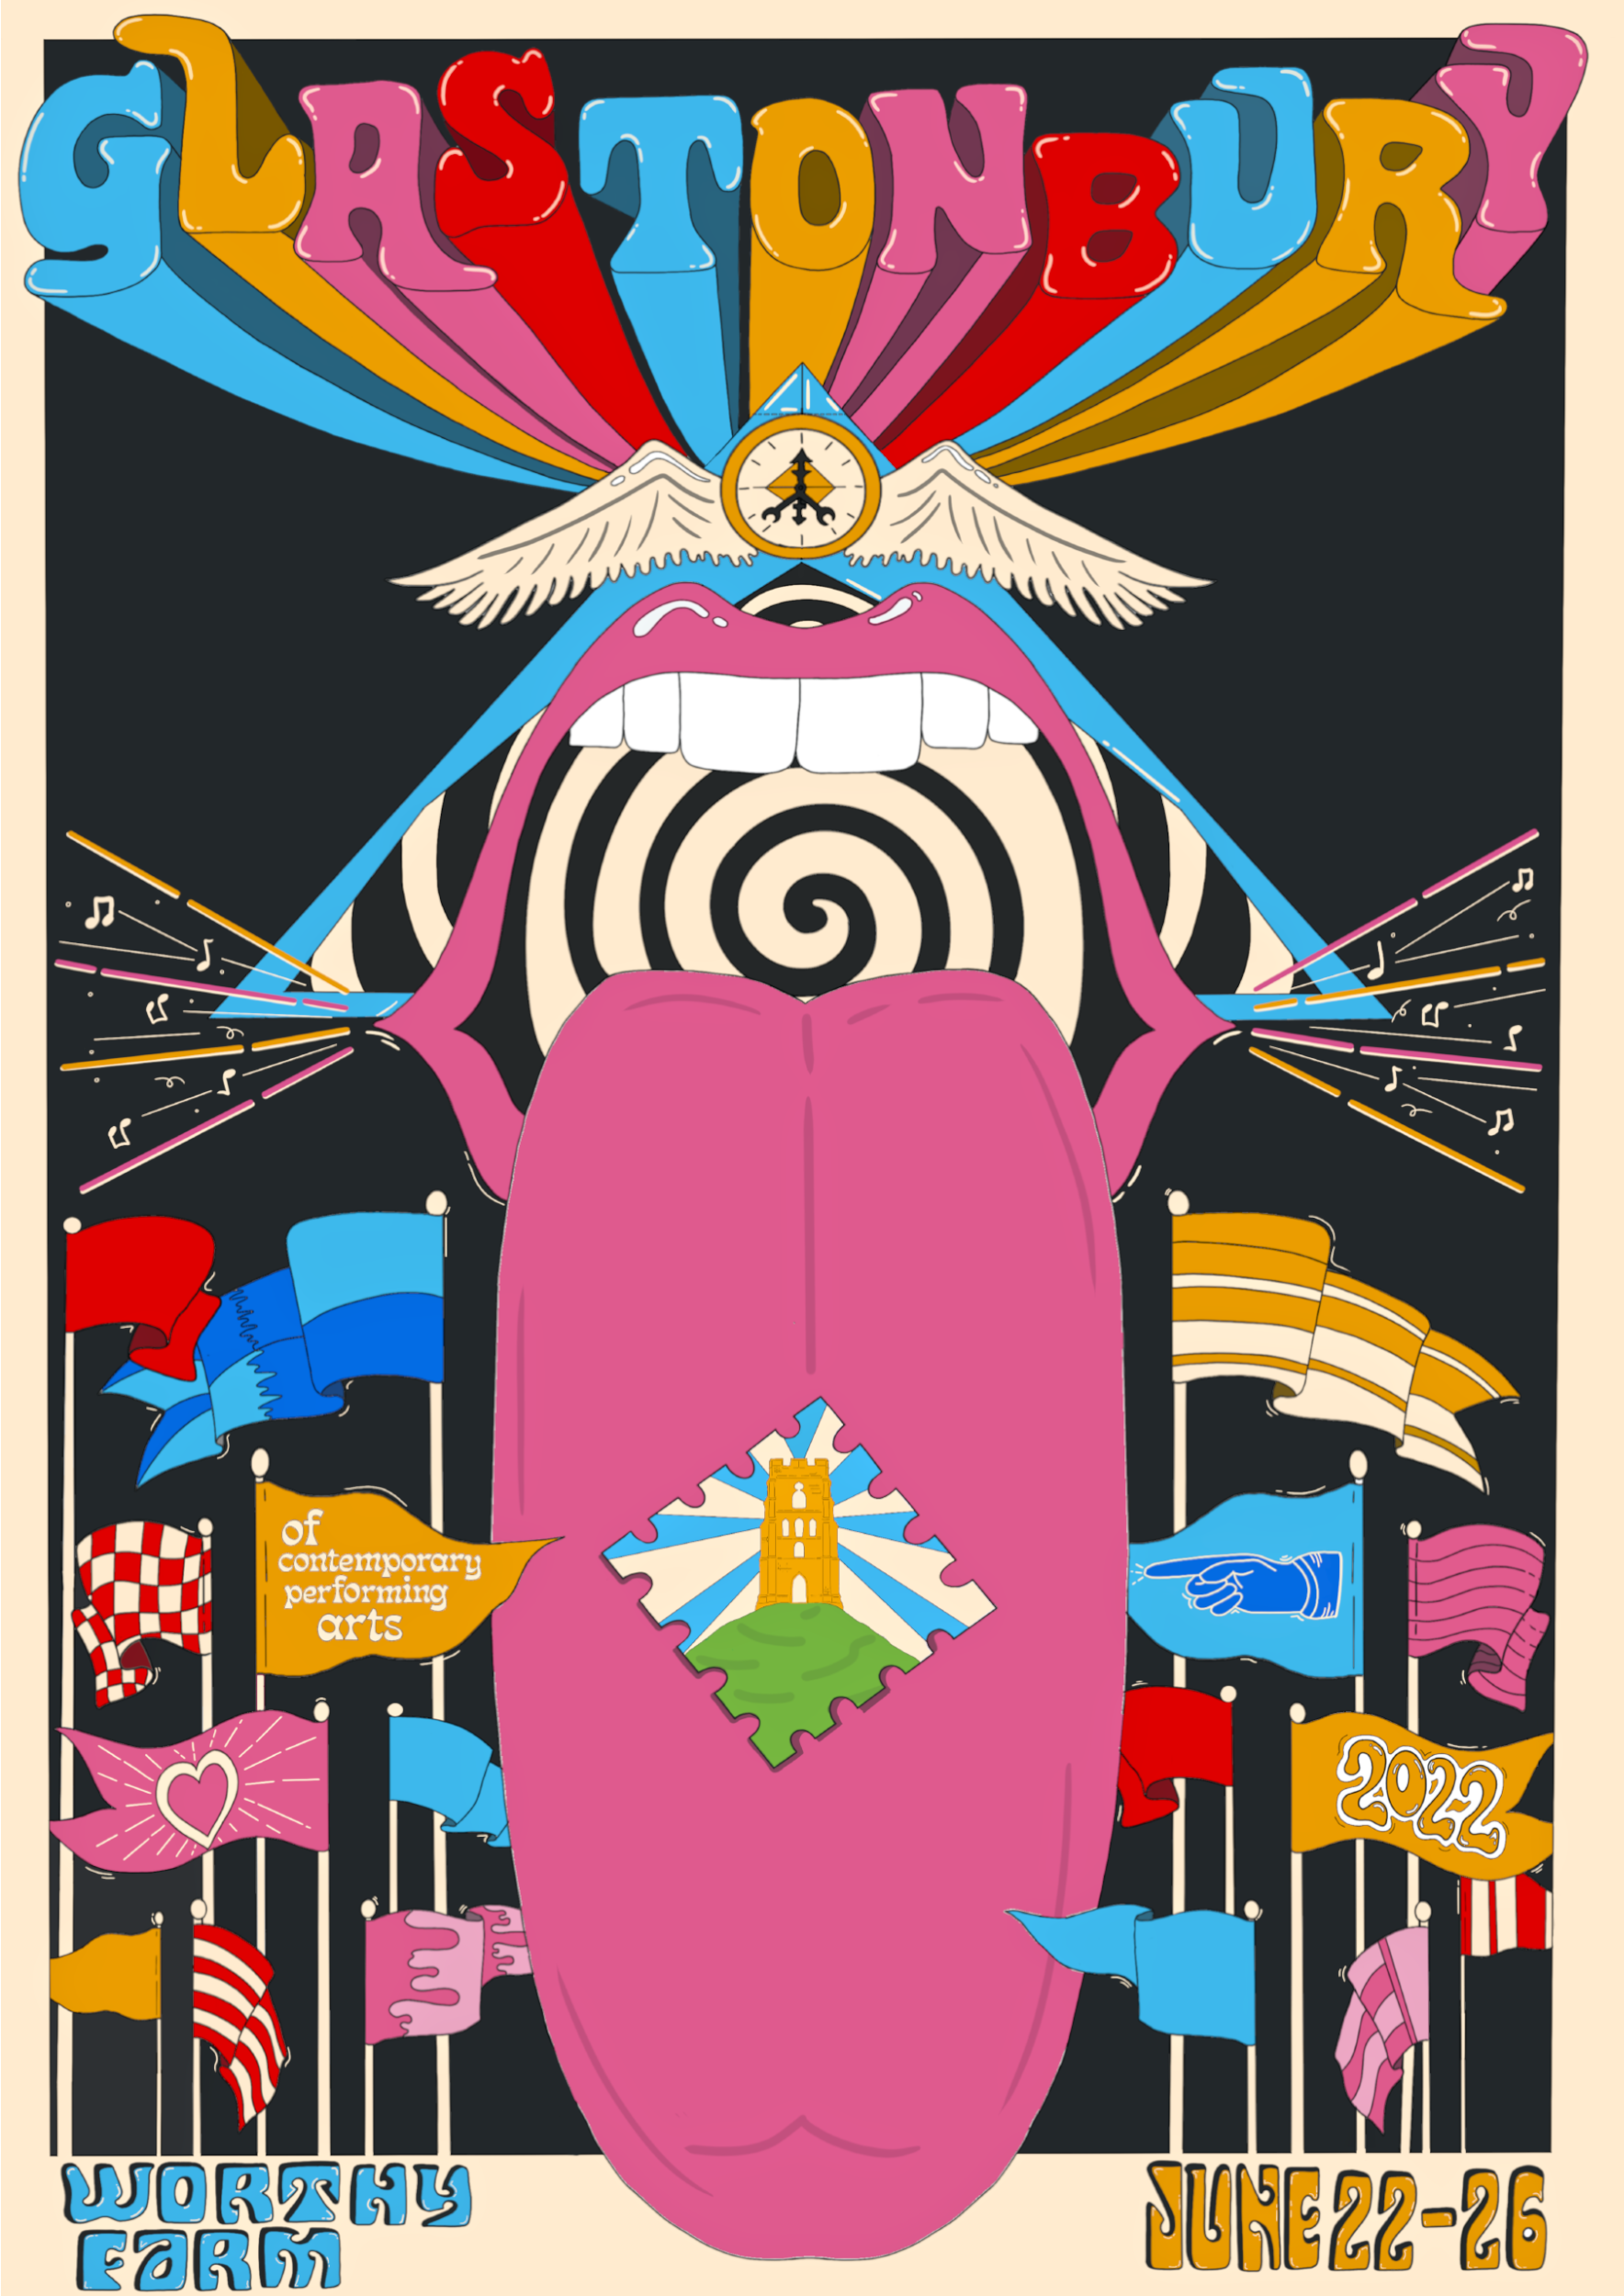 BA Illustration work by Shannon Stewart showing a colourful animated poster of a mouth with tongue falling out, flags and colourful typography, promoting Glastonbury 2022.